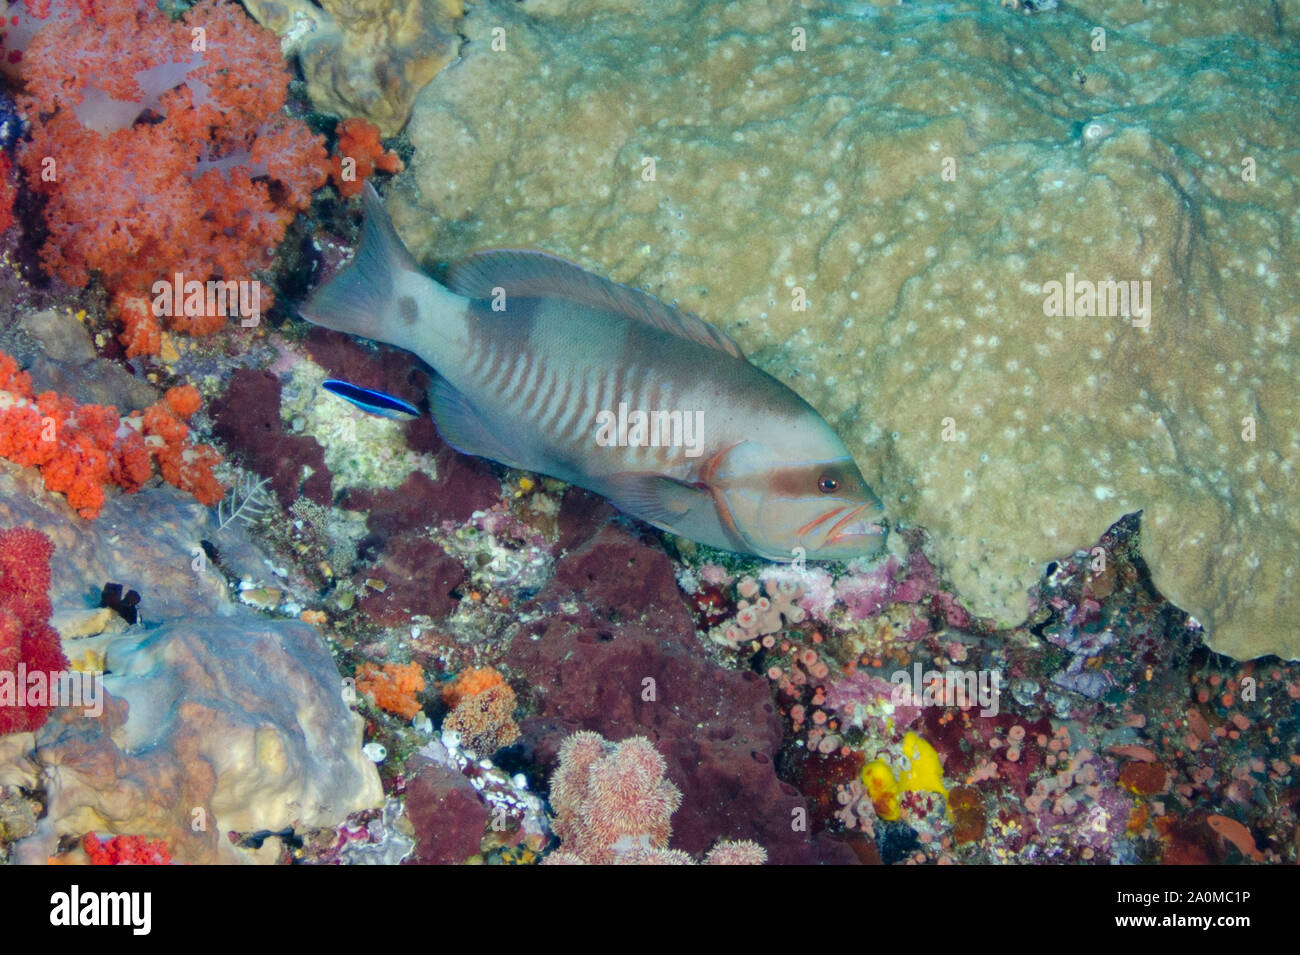 Masked Grouper, Gracila albomarginata, being cleaned by Bluestreak Cleaner Wrasse, Labroides dimidiatus, by coral, Crystal Rock dive site Stock Photo